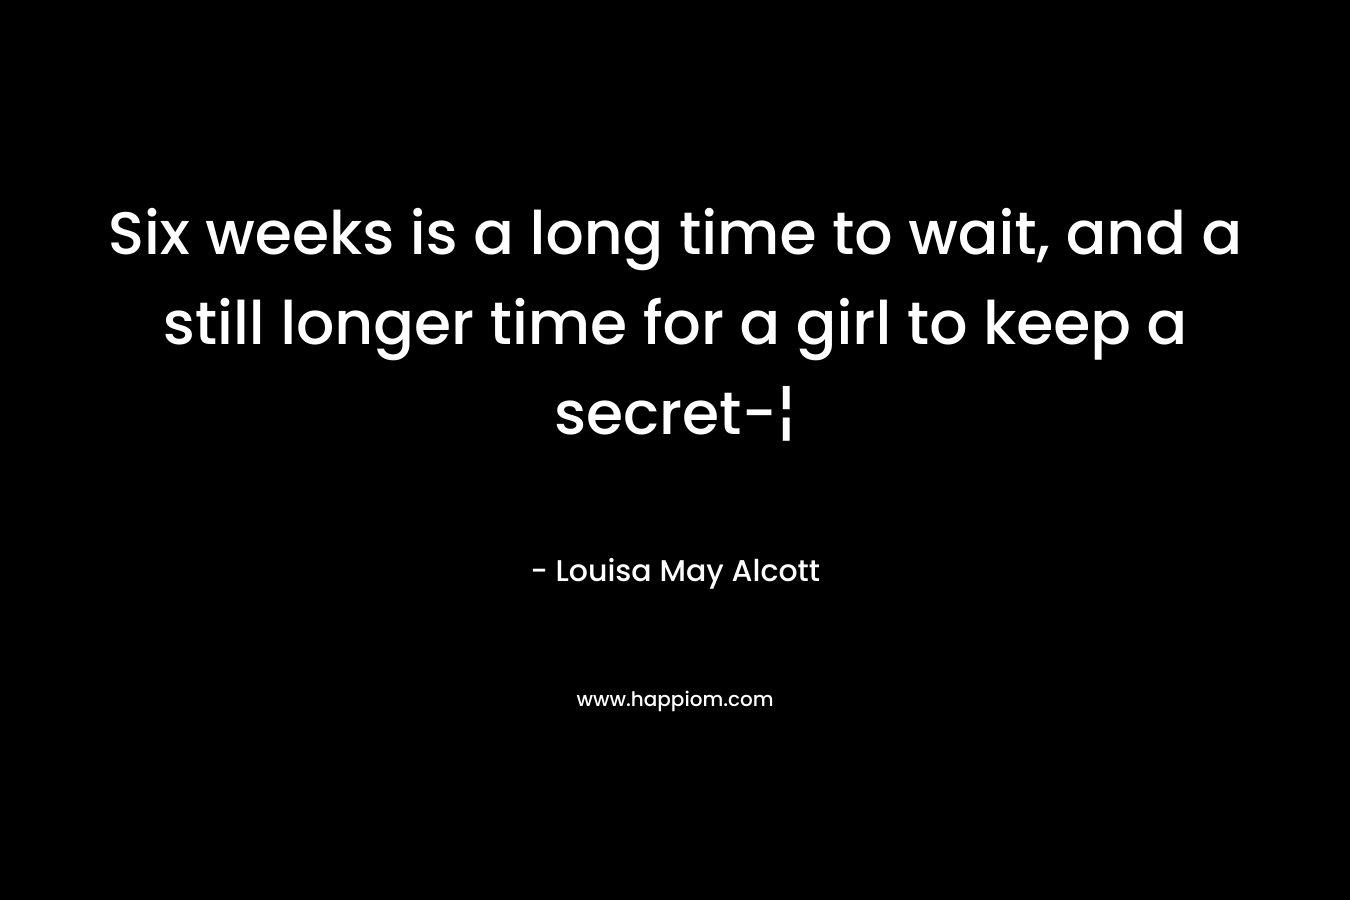 Six weeks is a long time to wait, and a still longer time for a girl to keep a secret-¦